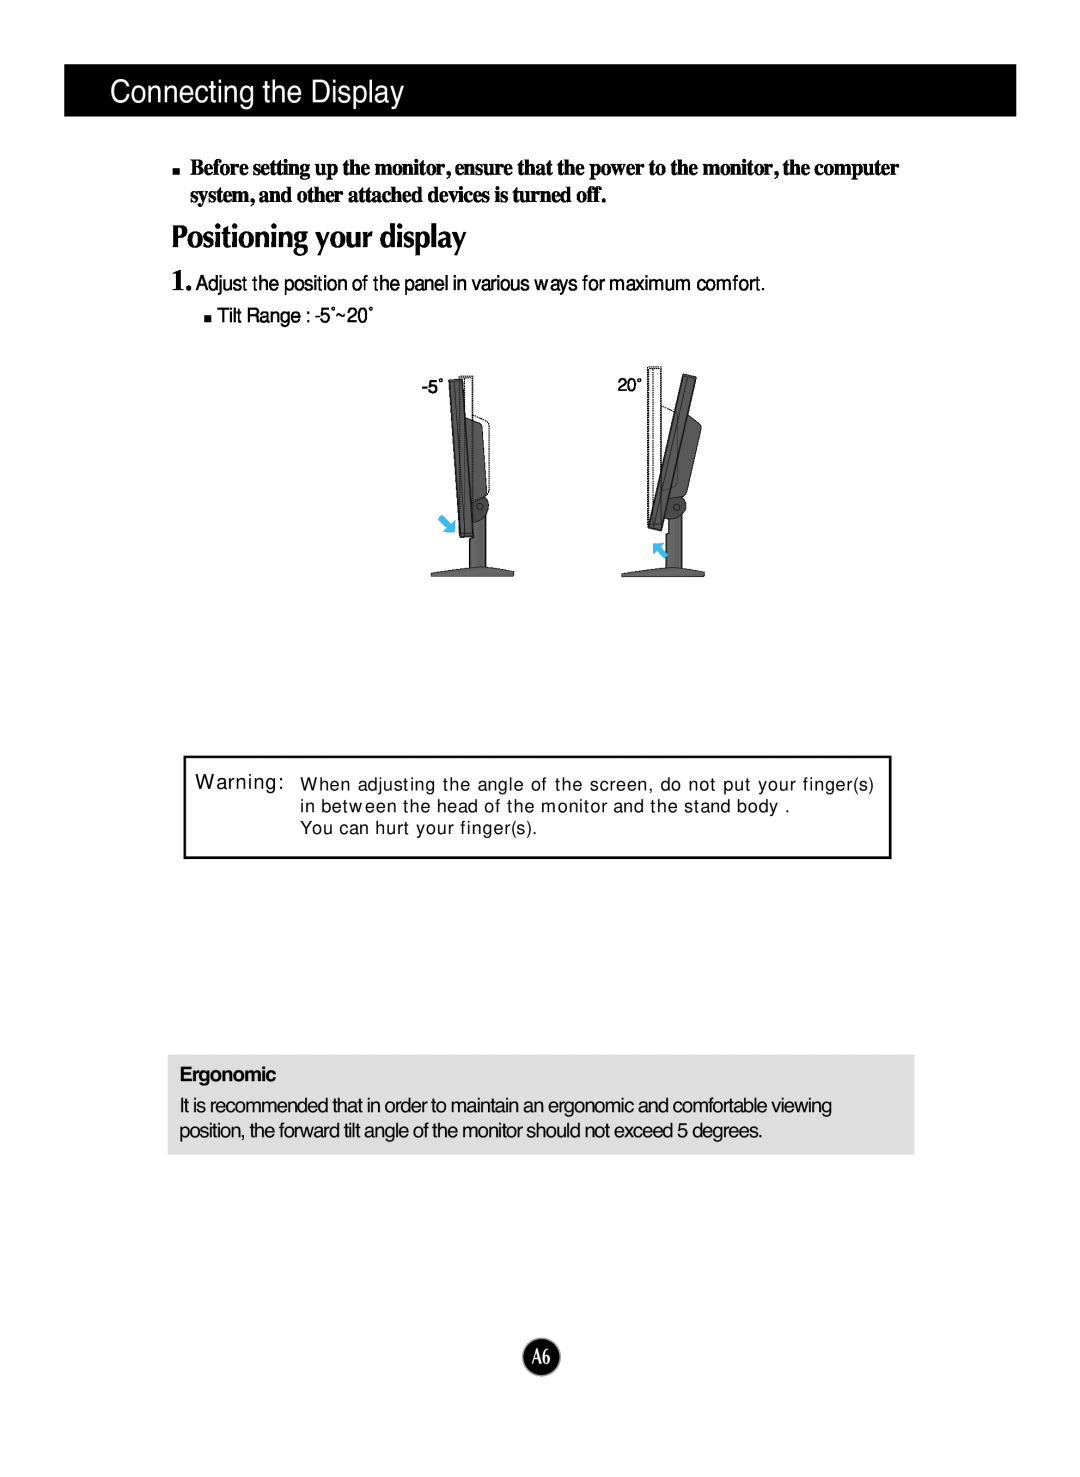 LG Electronics L192WS manual Positioning your display, Connecting the Display, You can hurt your fingers 